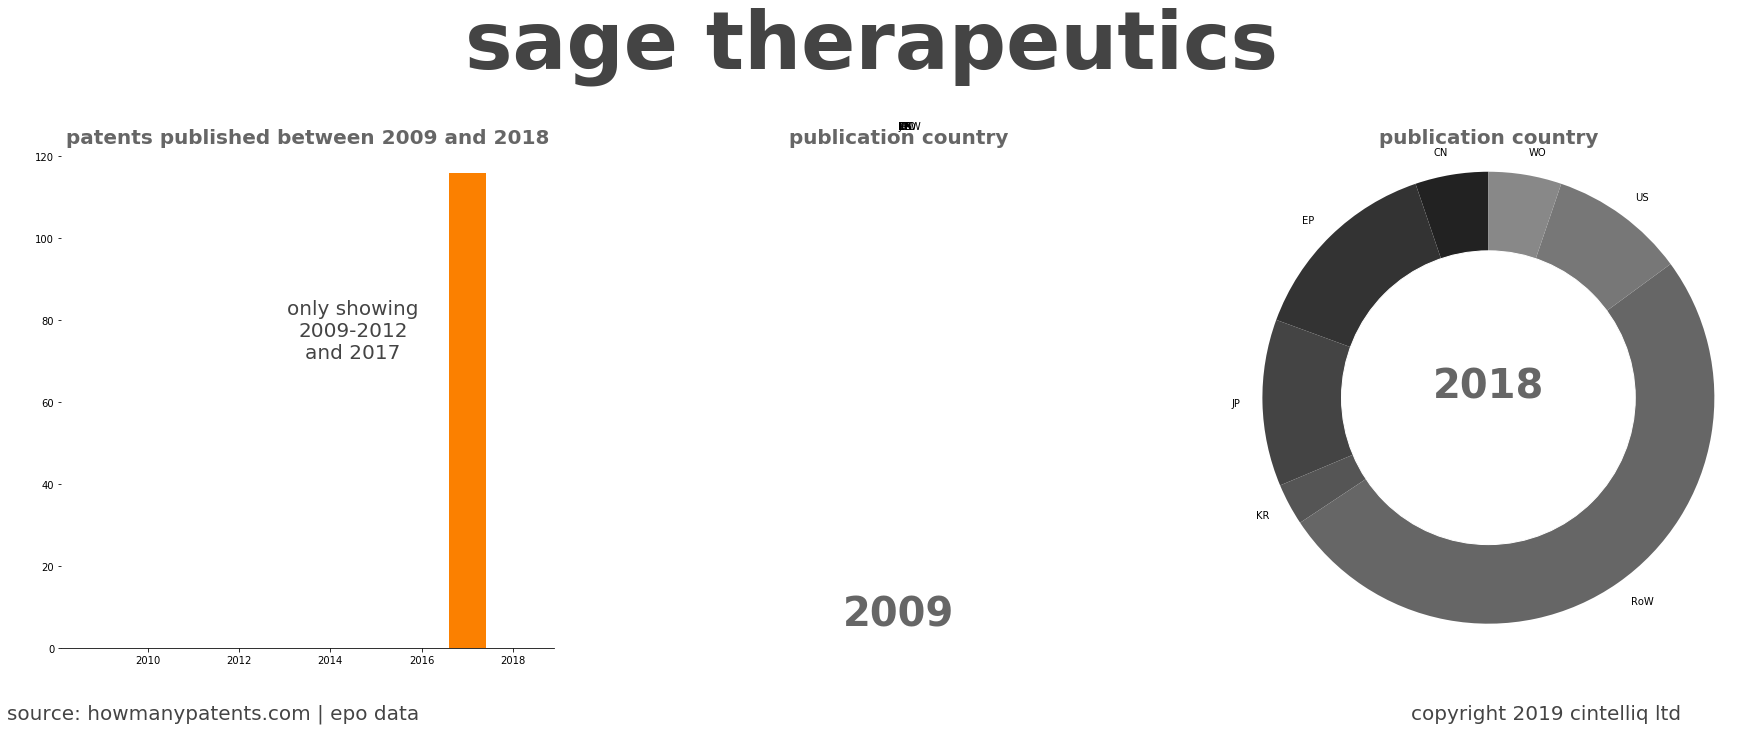 summary of patents for Sage Therapeutics